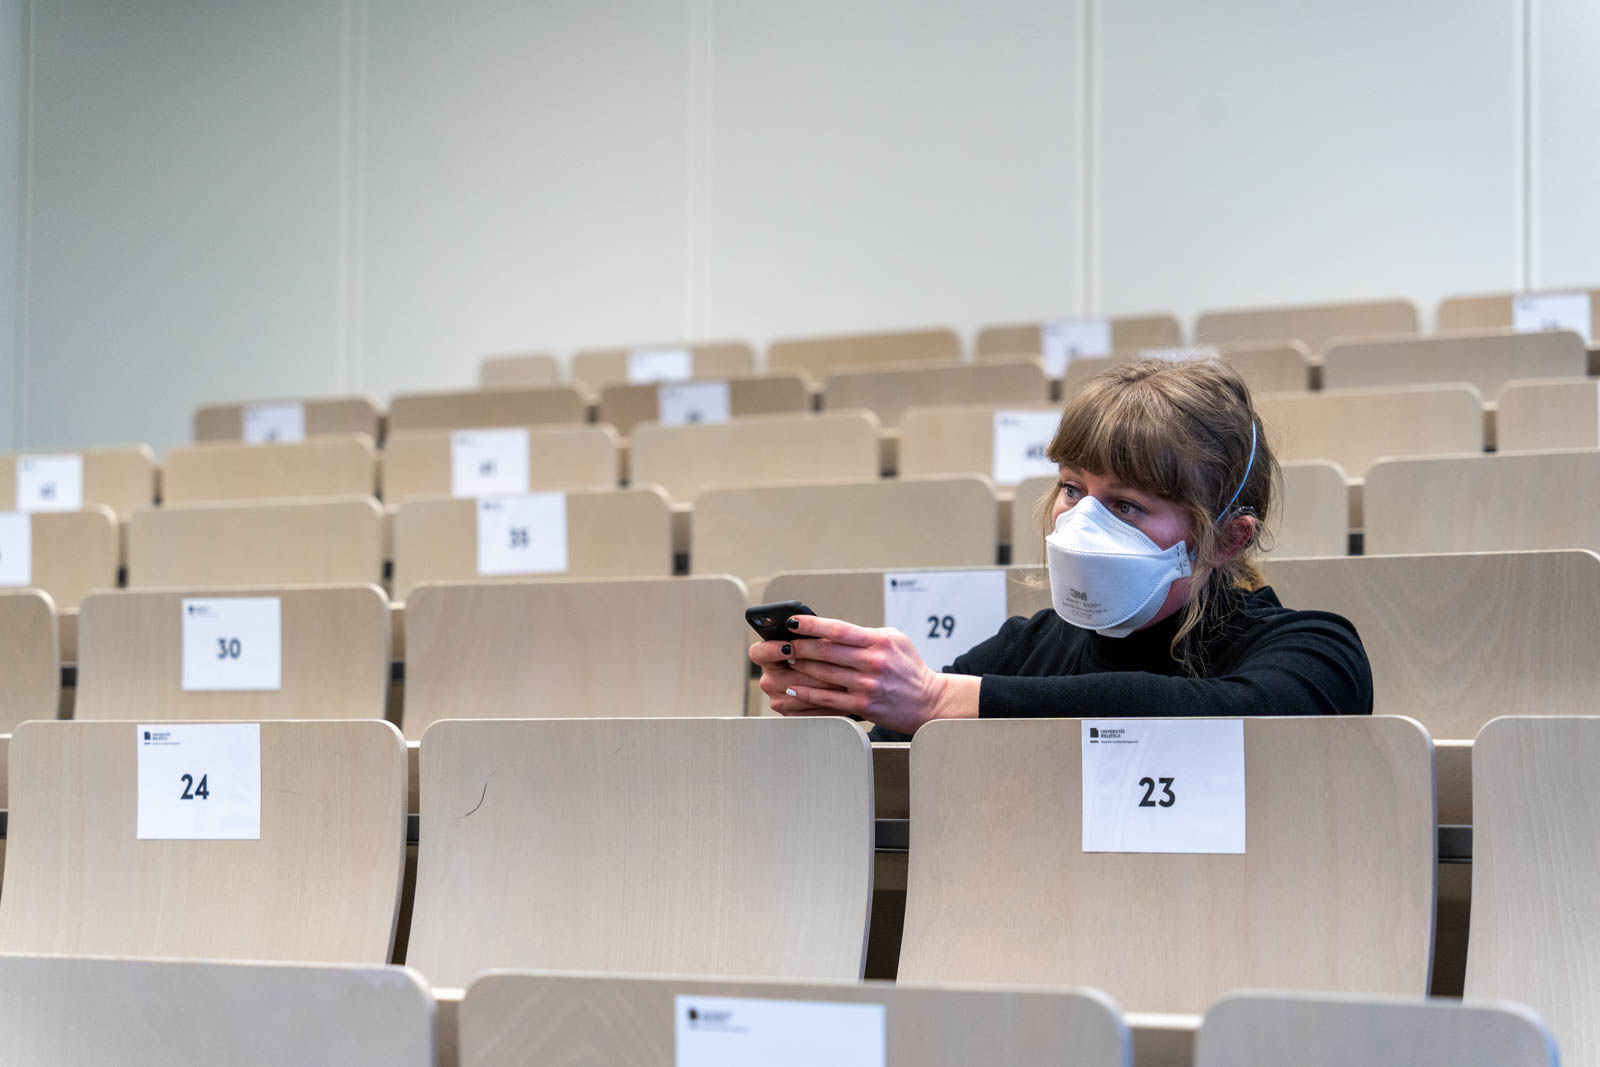 Student in the lecture hall with implant